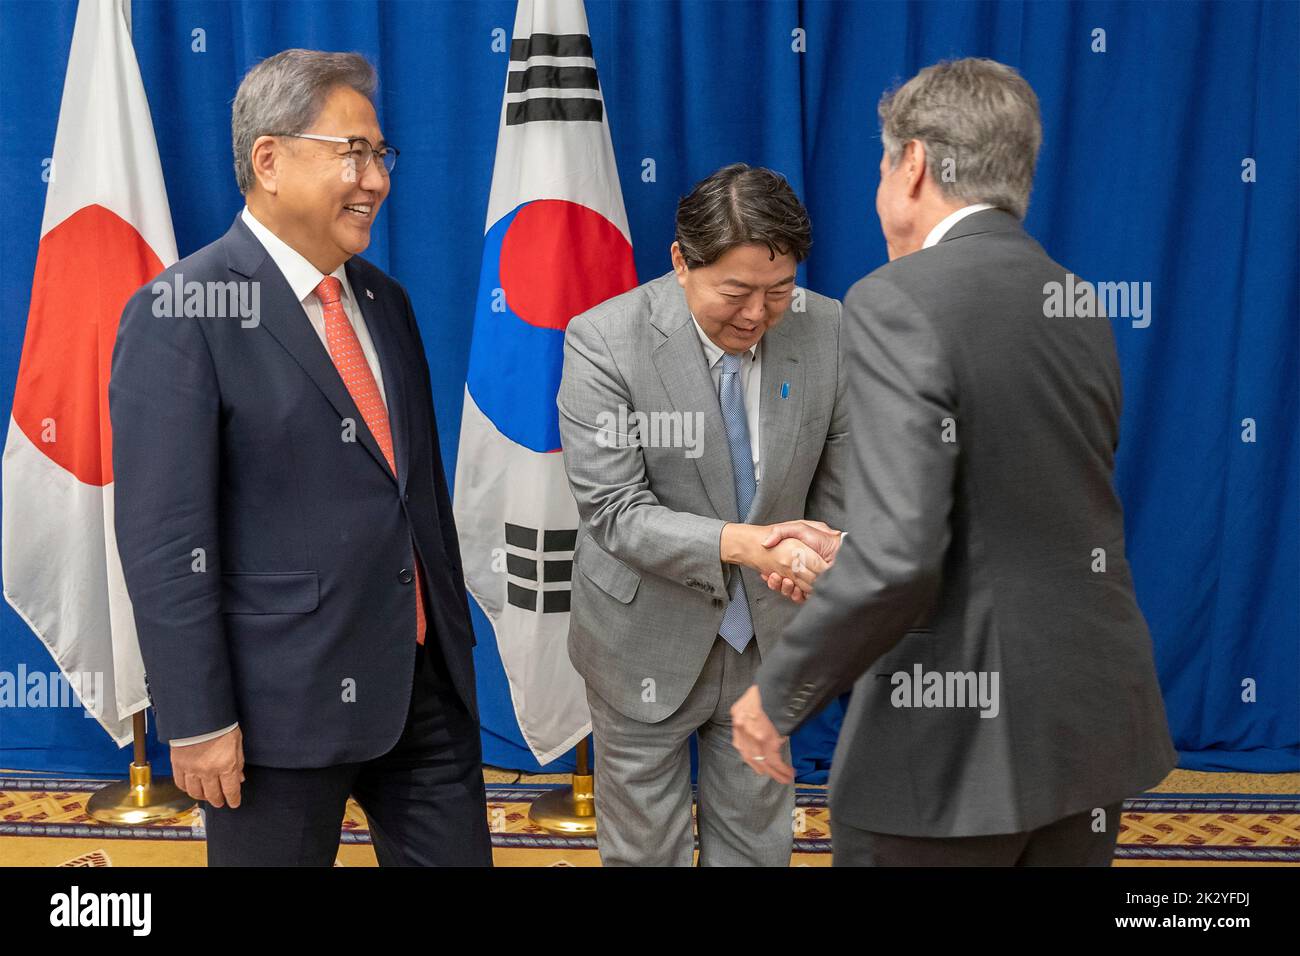 New York City, United States. 22nd Sep, 2022. U.S. Secretary of State Tony Blinken, left, shakes hands with Japanese Foreign Minister Hayashi Yoshimasa and Republic of Korea Foreign Minister Park Jin, left, before the start of their trilateral meeting on the sidelines of the 77th Session of the U.N General Assembly, September 22, 2022, in New York City. Credit: Ron Przysucha/State Department Photo/Alamy Live News Stock Photo